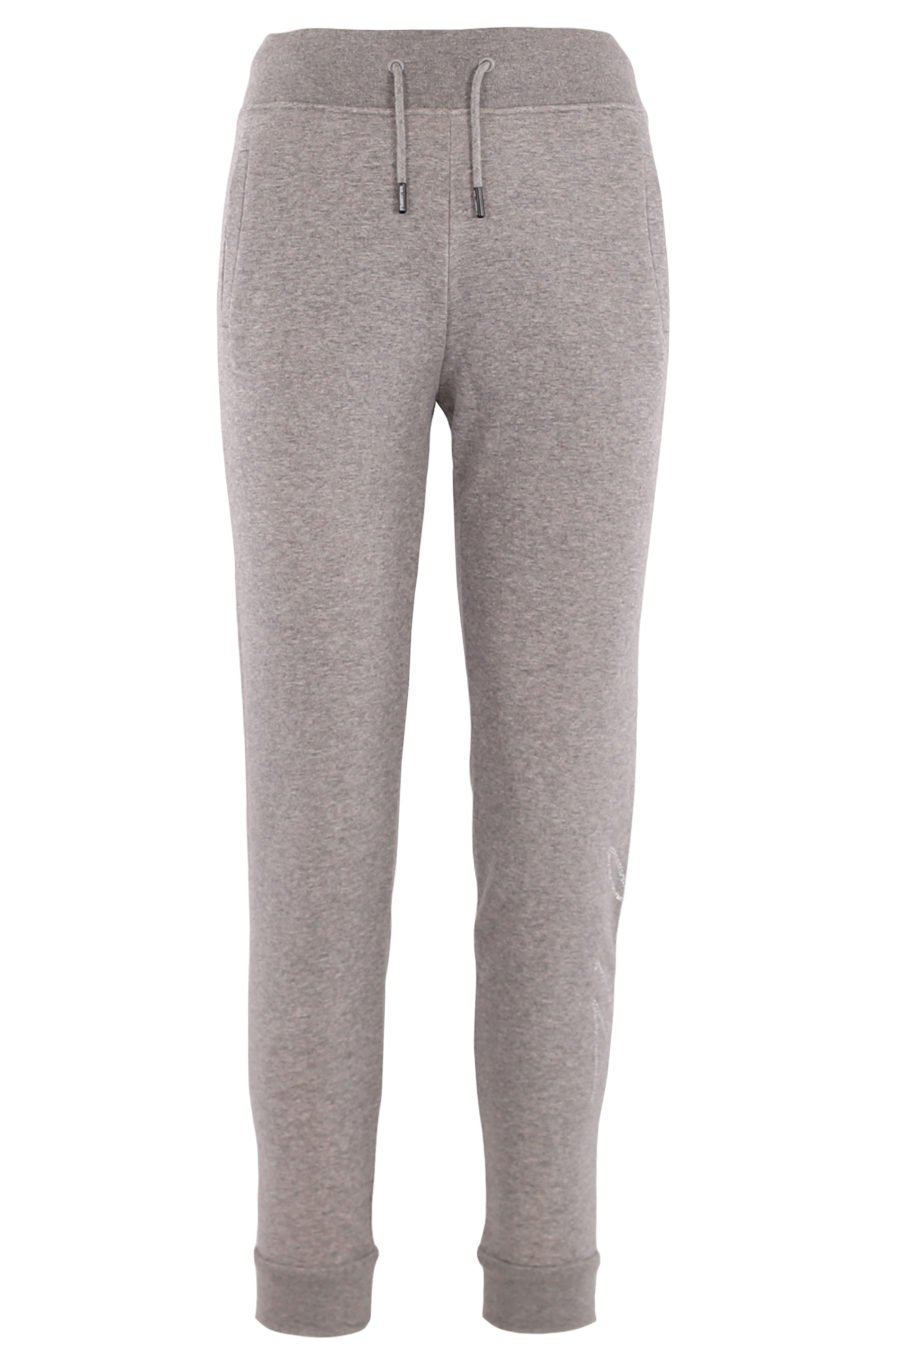 Tracksuit bottoms grey with crystals logo - 113d33ed1b668cc5046aecf98f171847e5a36661